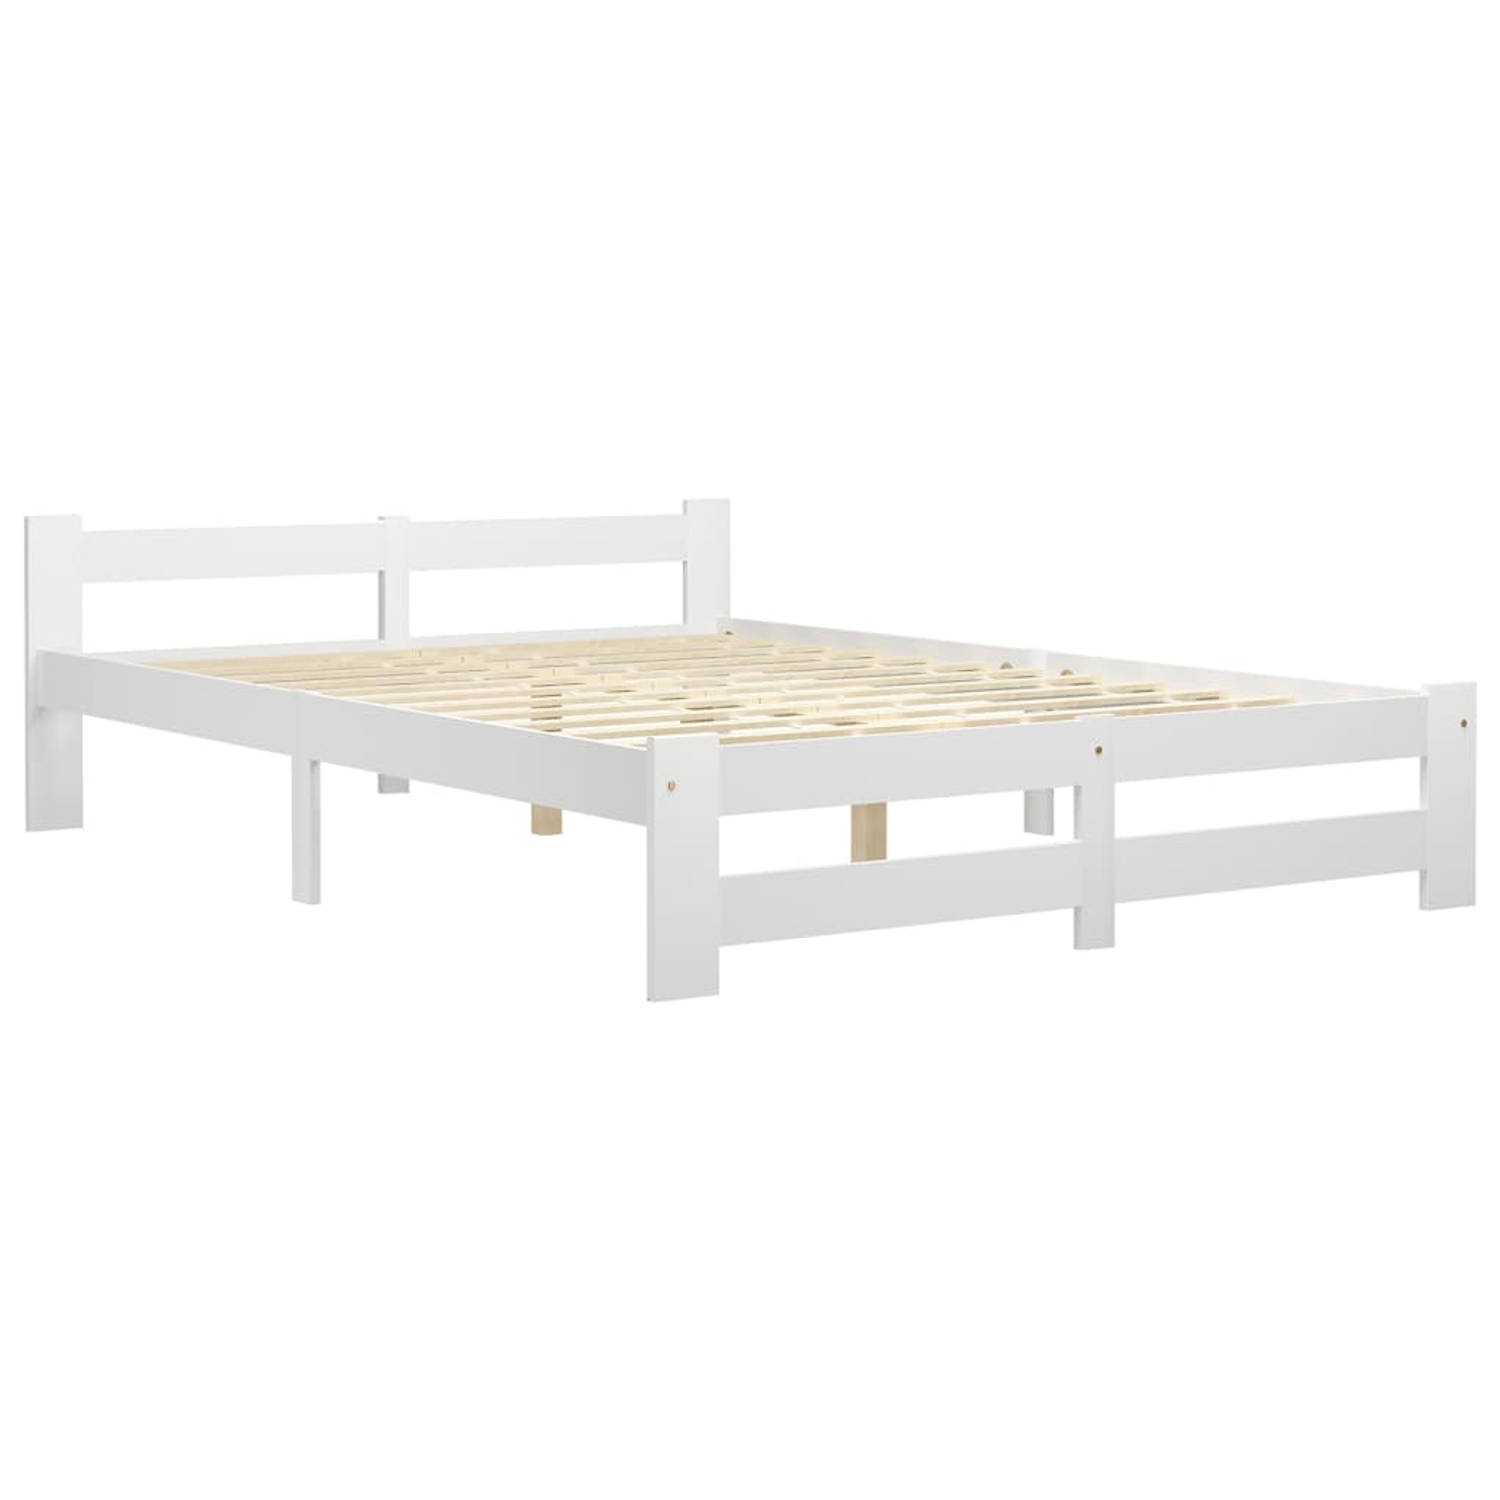 The Living Store Bedframe massief grenenhout wit 140x200 cm - Bedframe - Bedframes - Bed Frame - Bed Frames - Bed - Bedden - Houten Bedframe - Houten Bedframes - 2-persoonsbed - 2